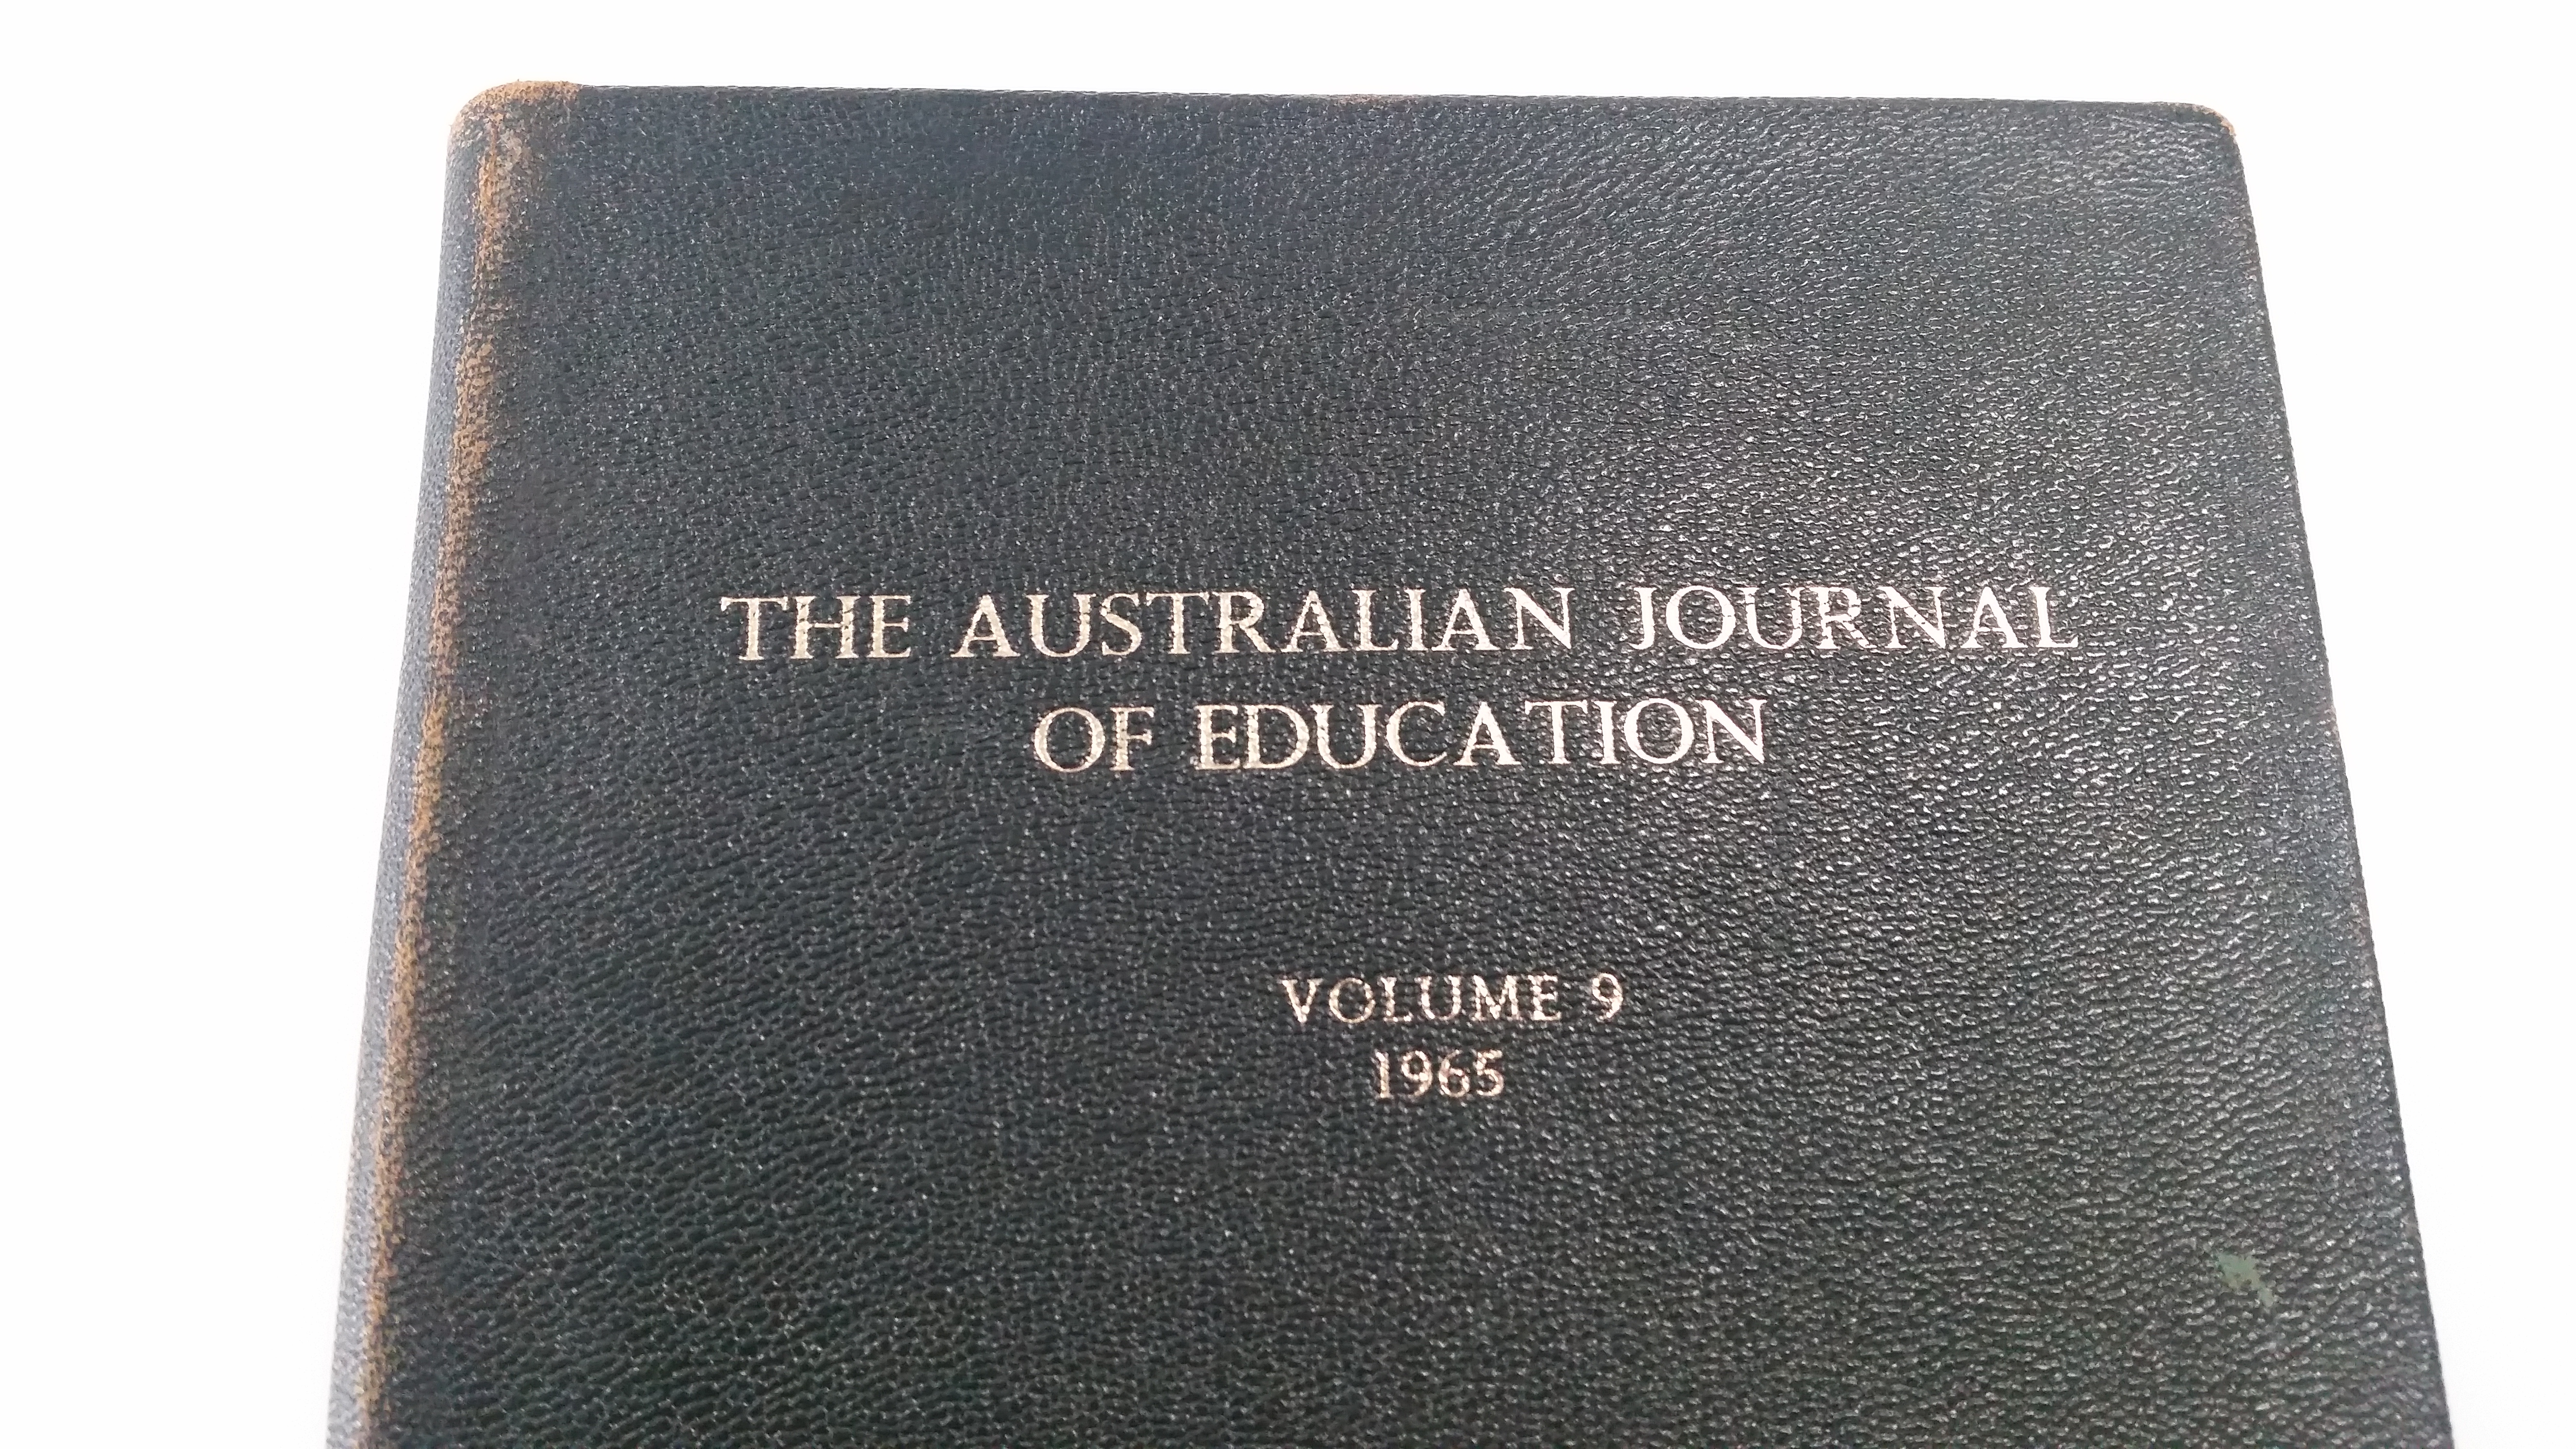 Education resource from 1965.